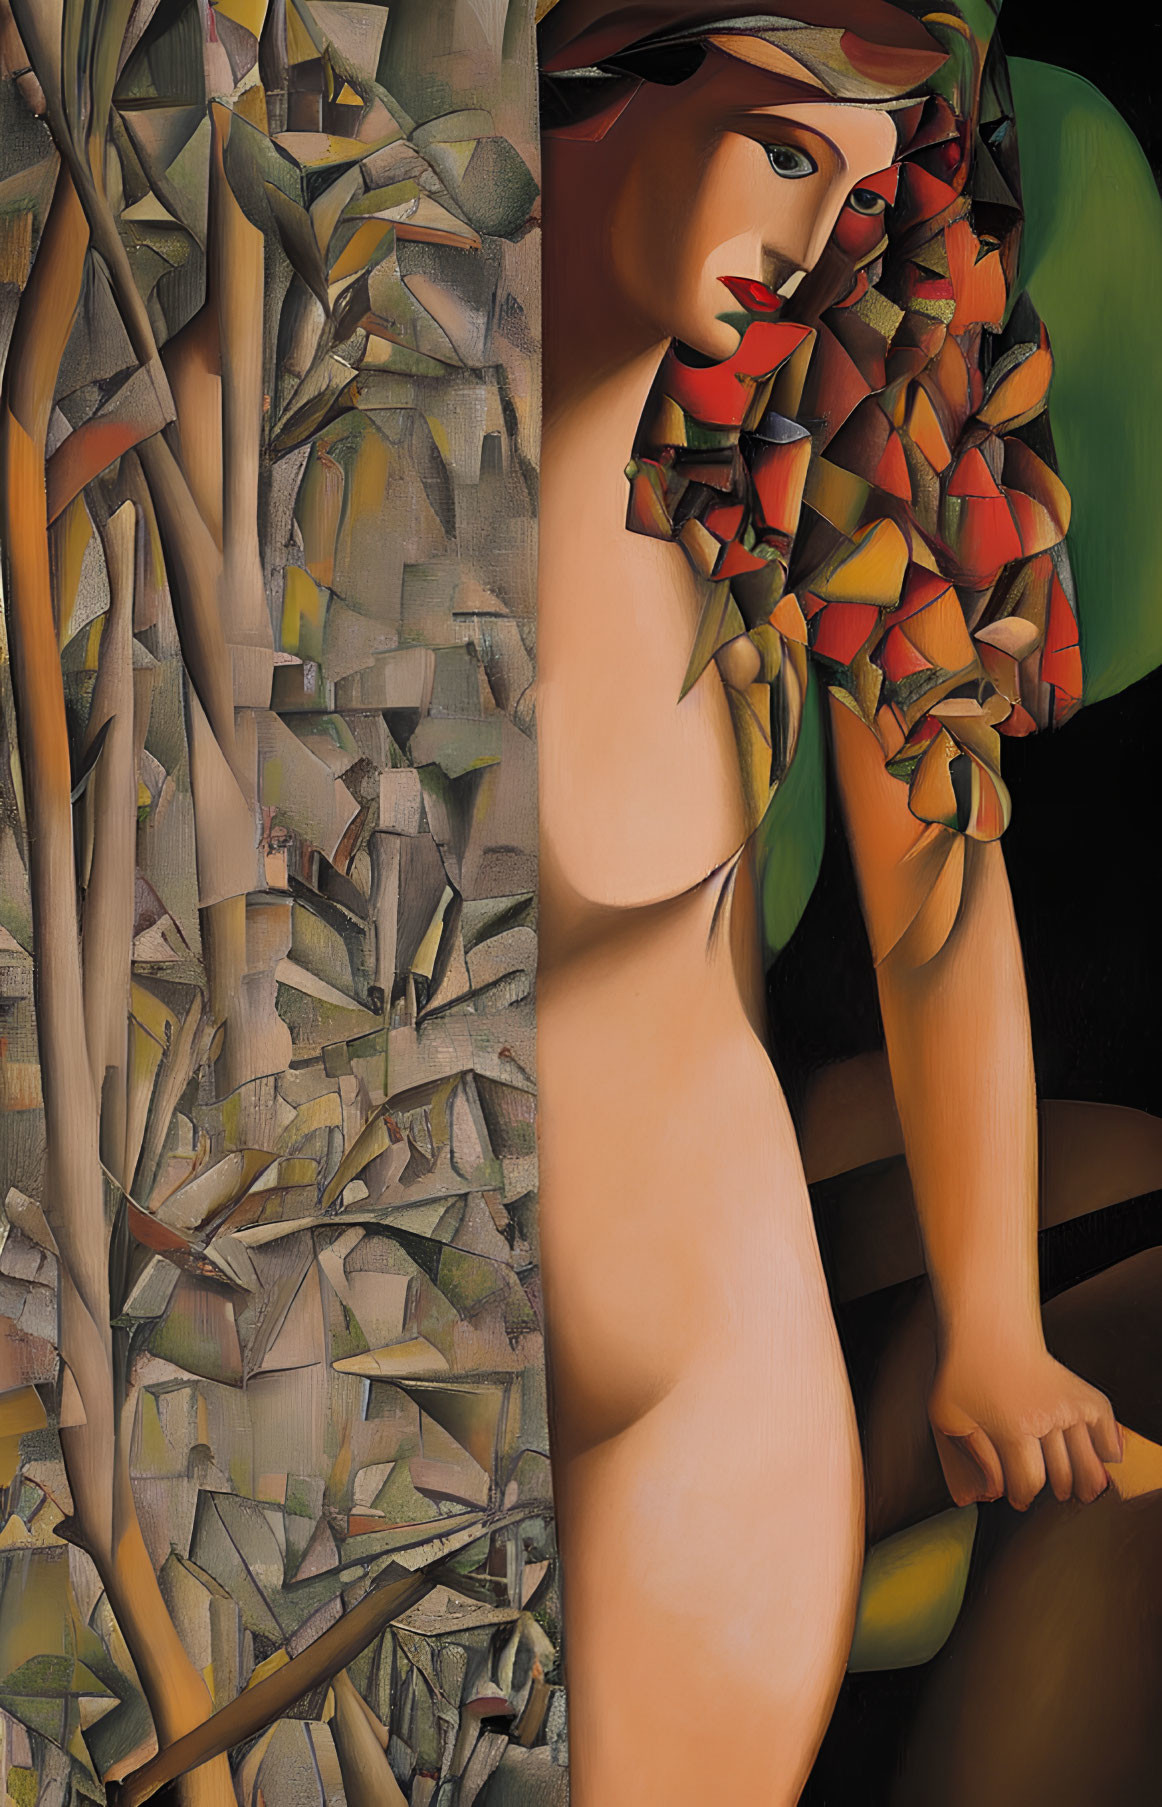 Stylized nude female figure with red cap in geometric woodland setting